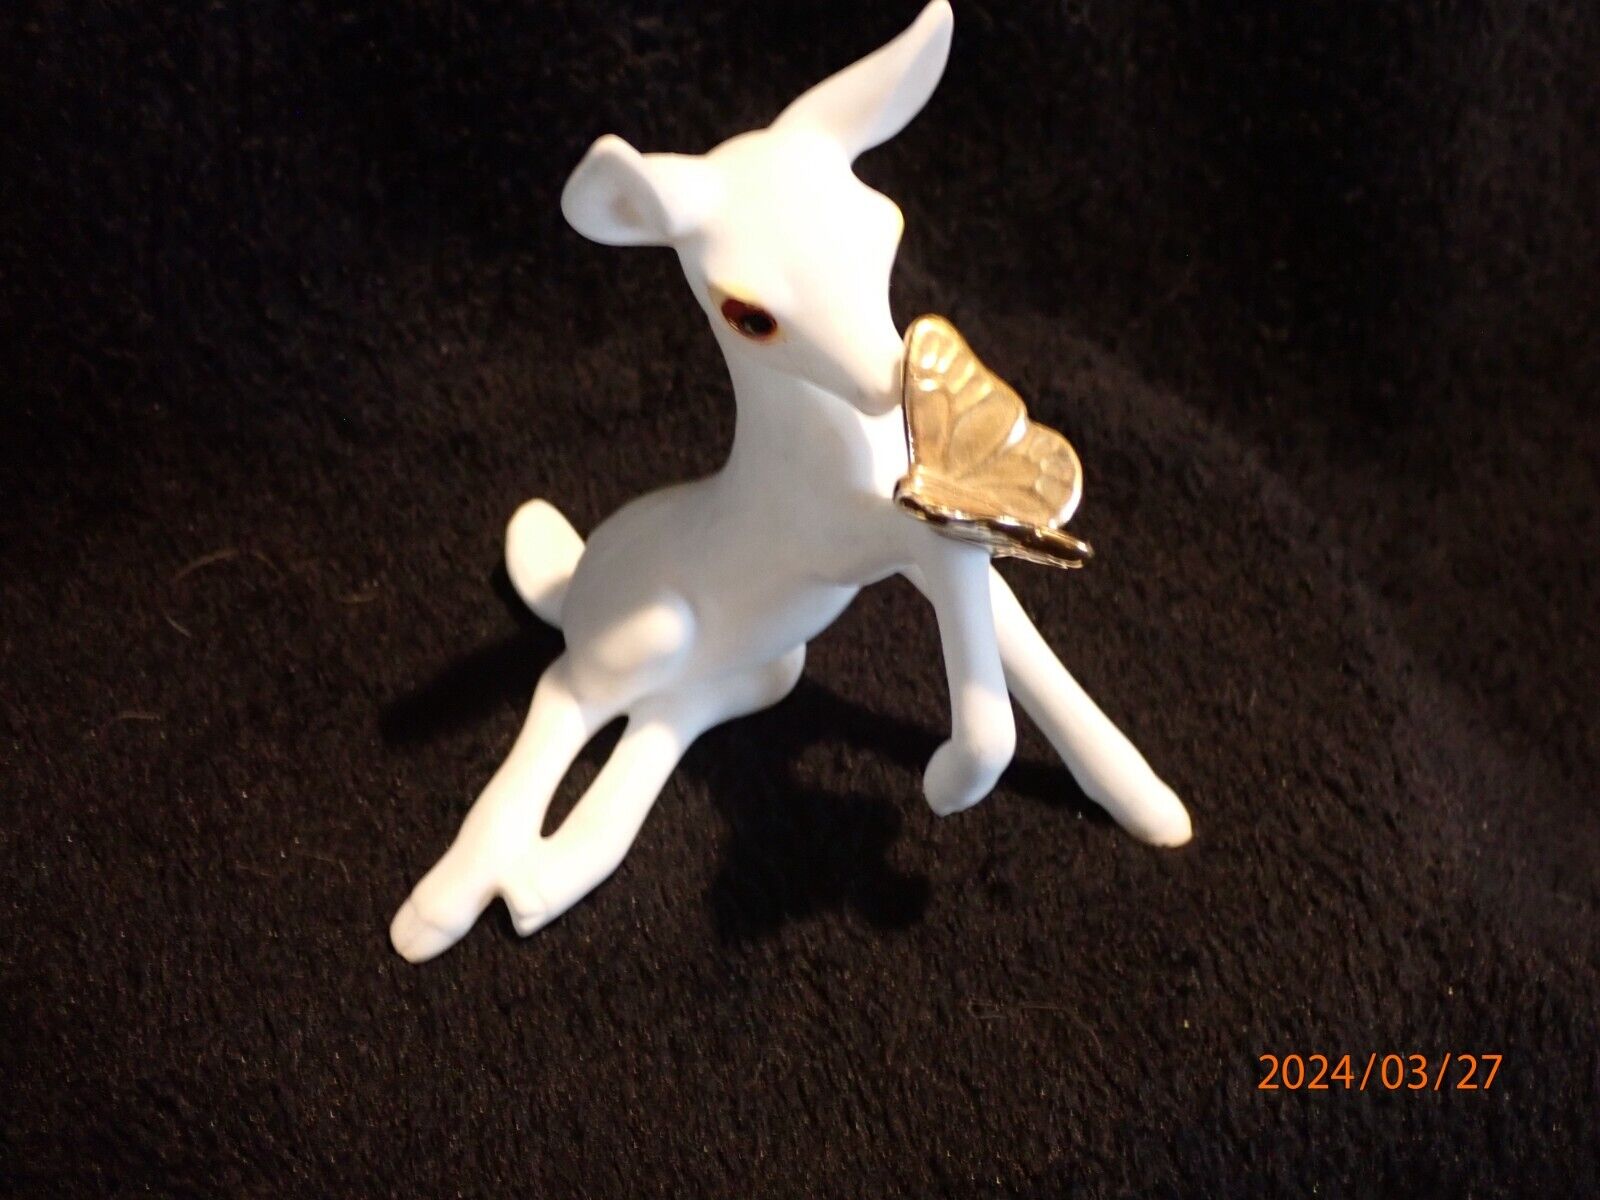  Vintage White Deer Gold Figurine by Freeman for George Good -Perfect for Mom